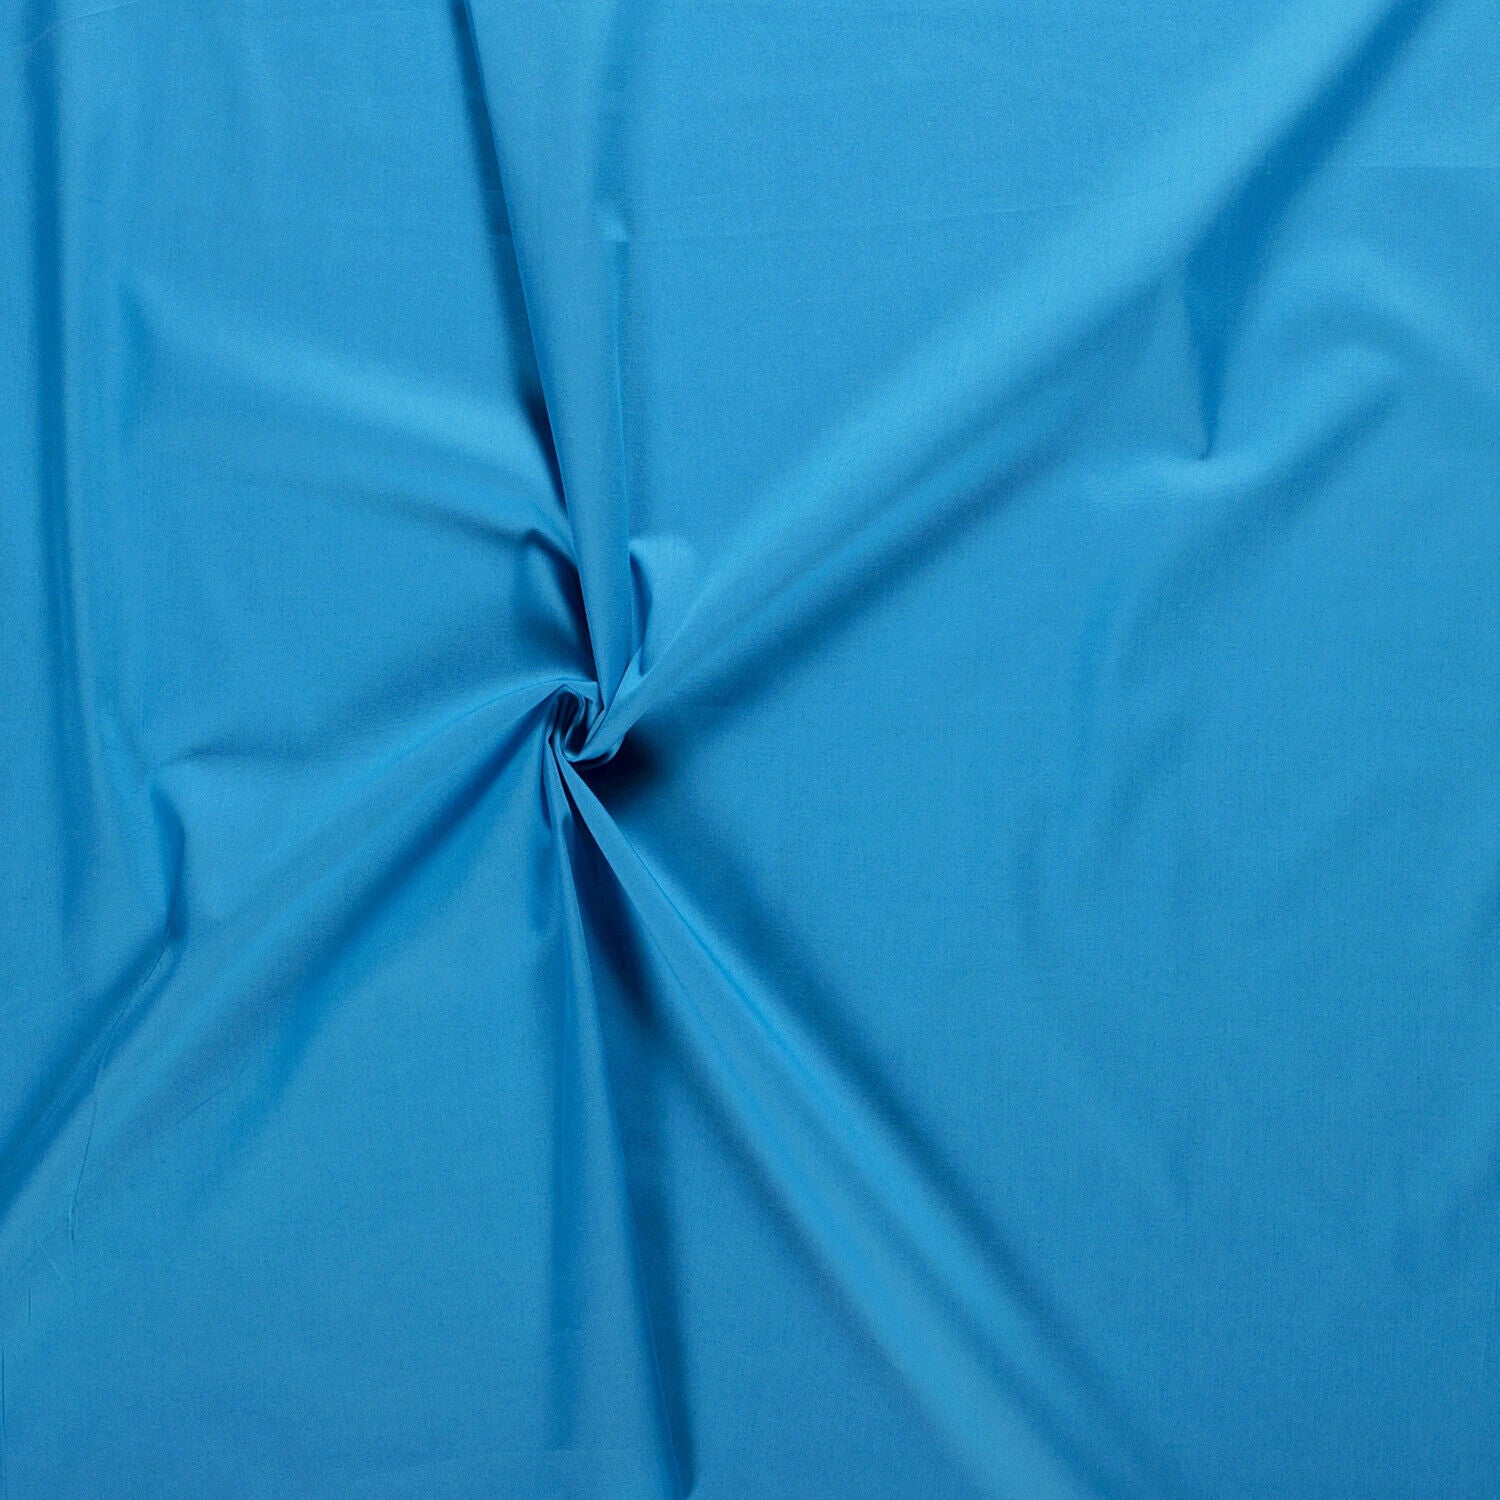 Buy 004-turquoise Cotton poplin * From 50 cm